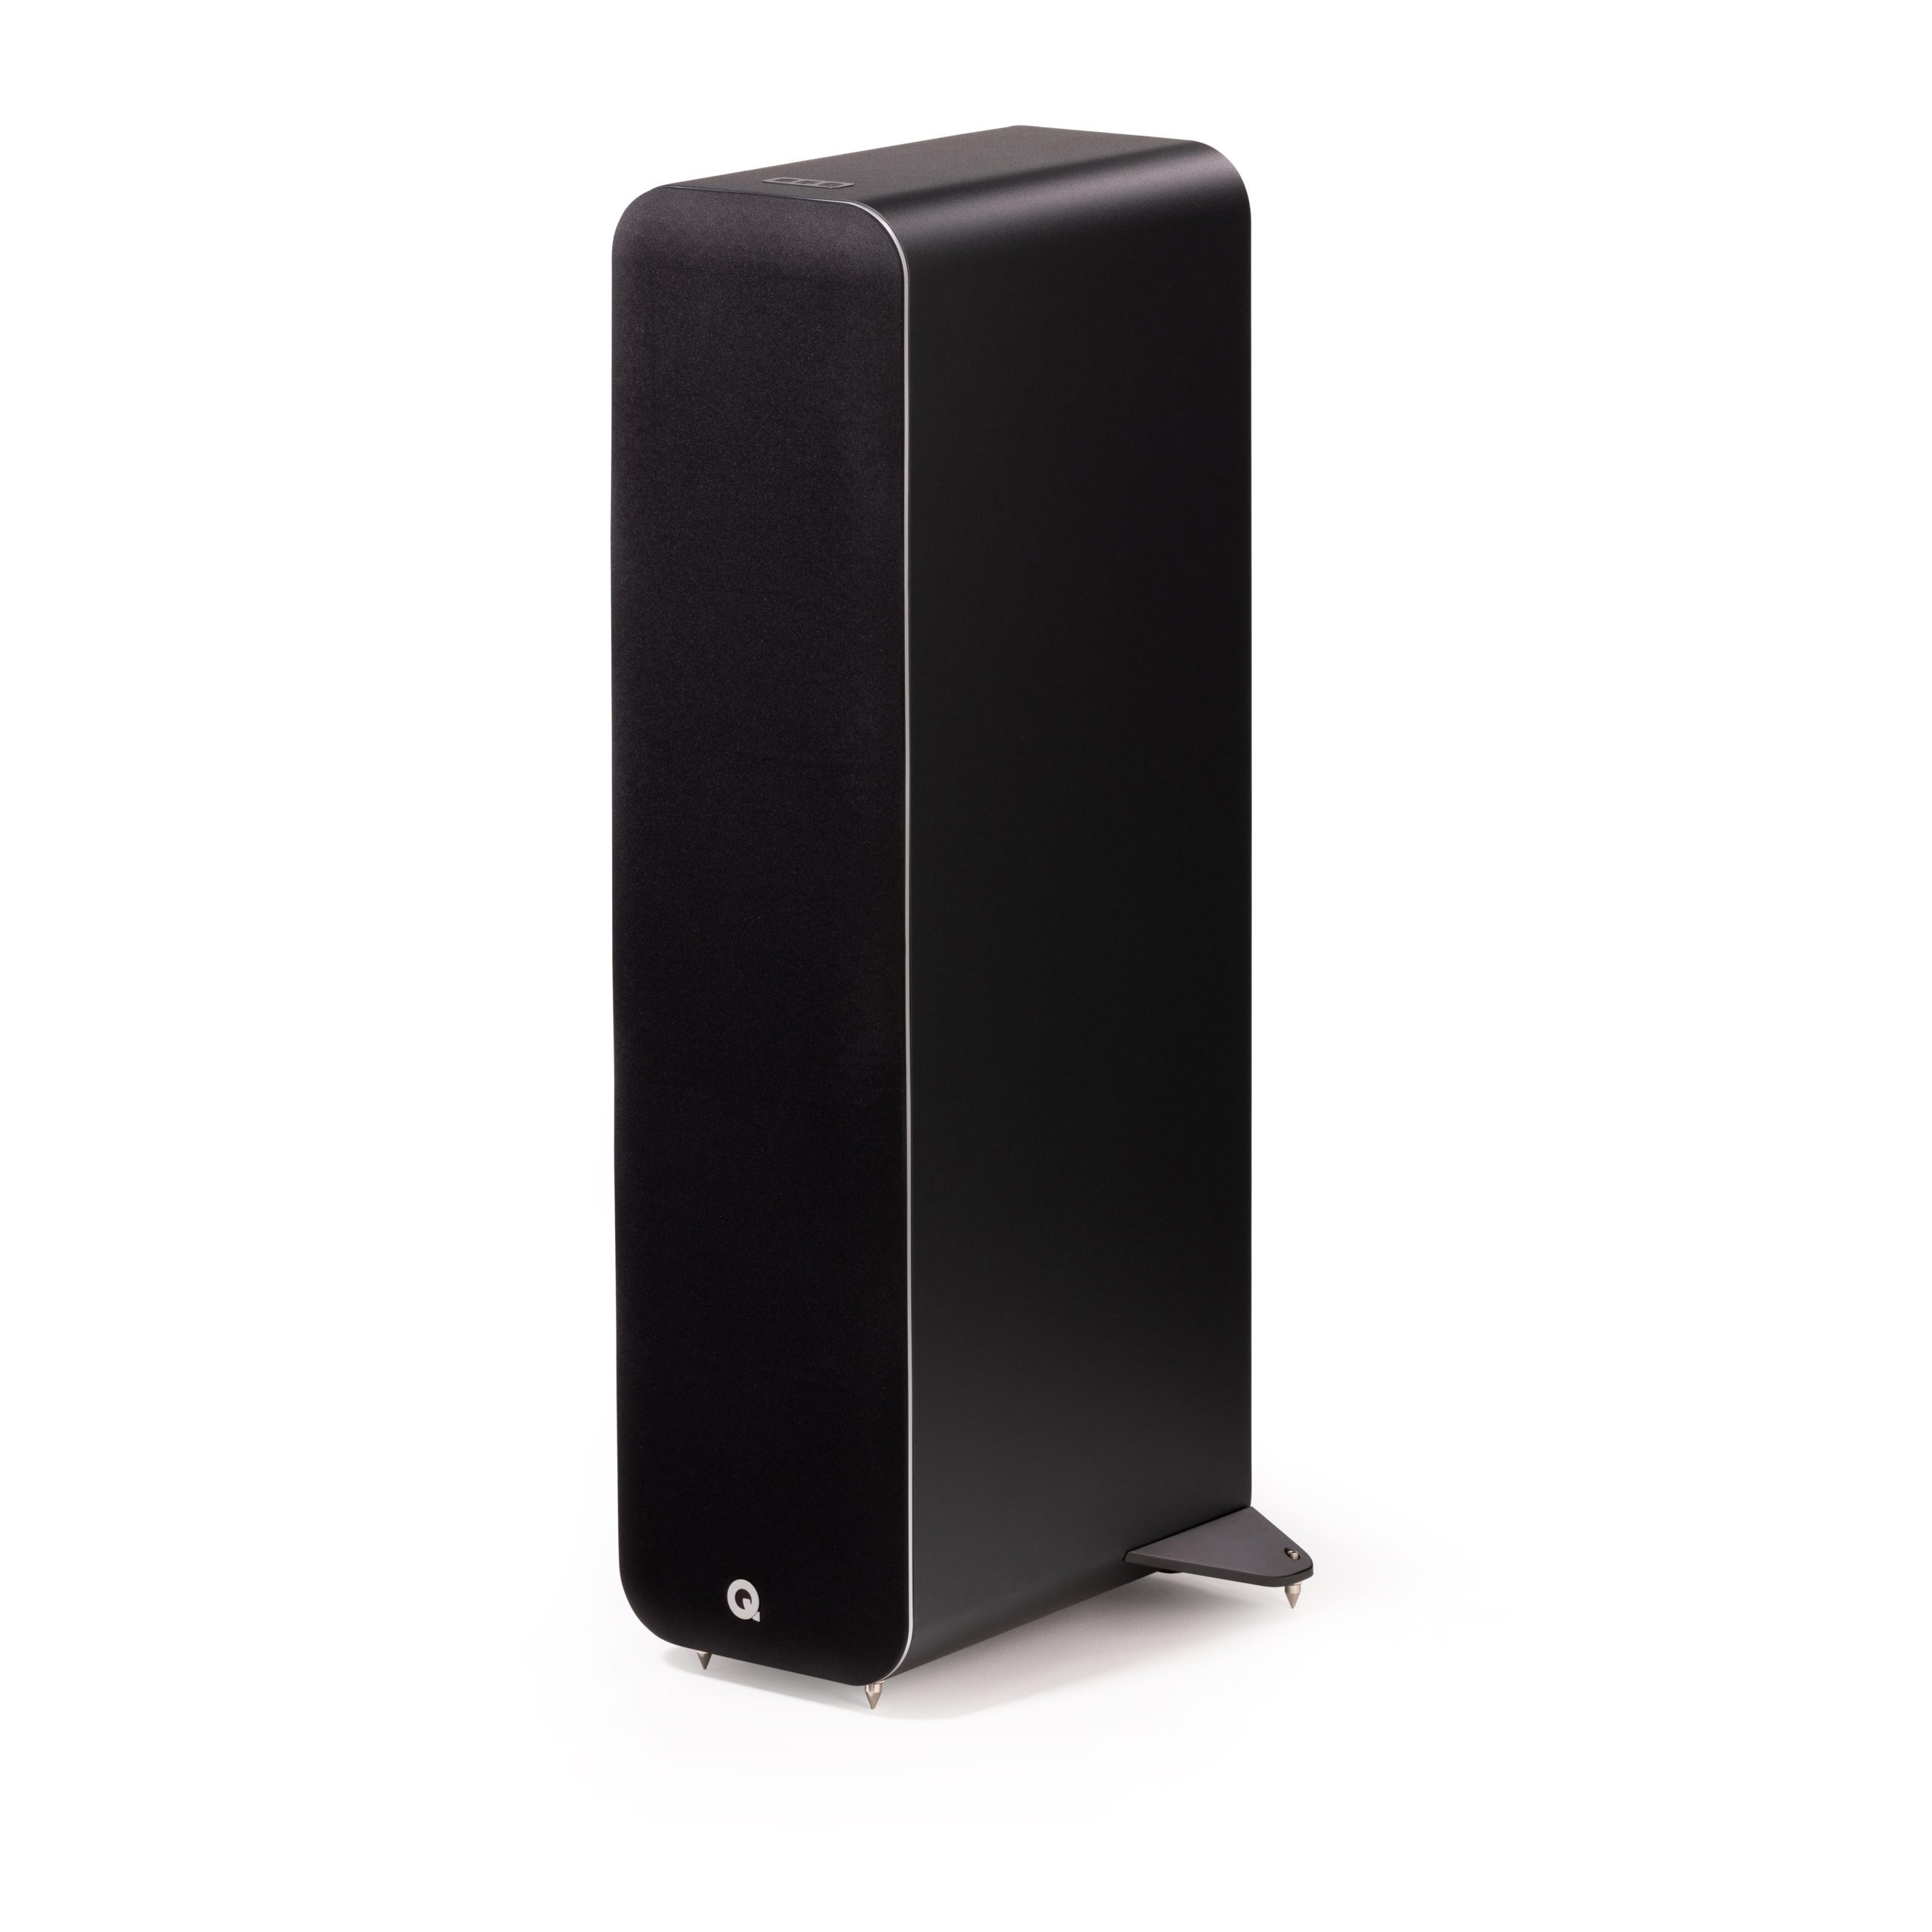 M40 Micro Tower, Wireless music system